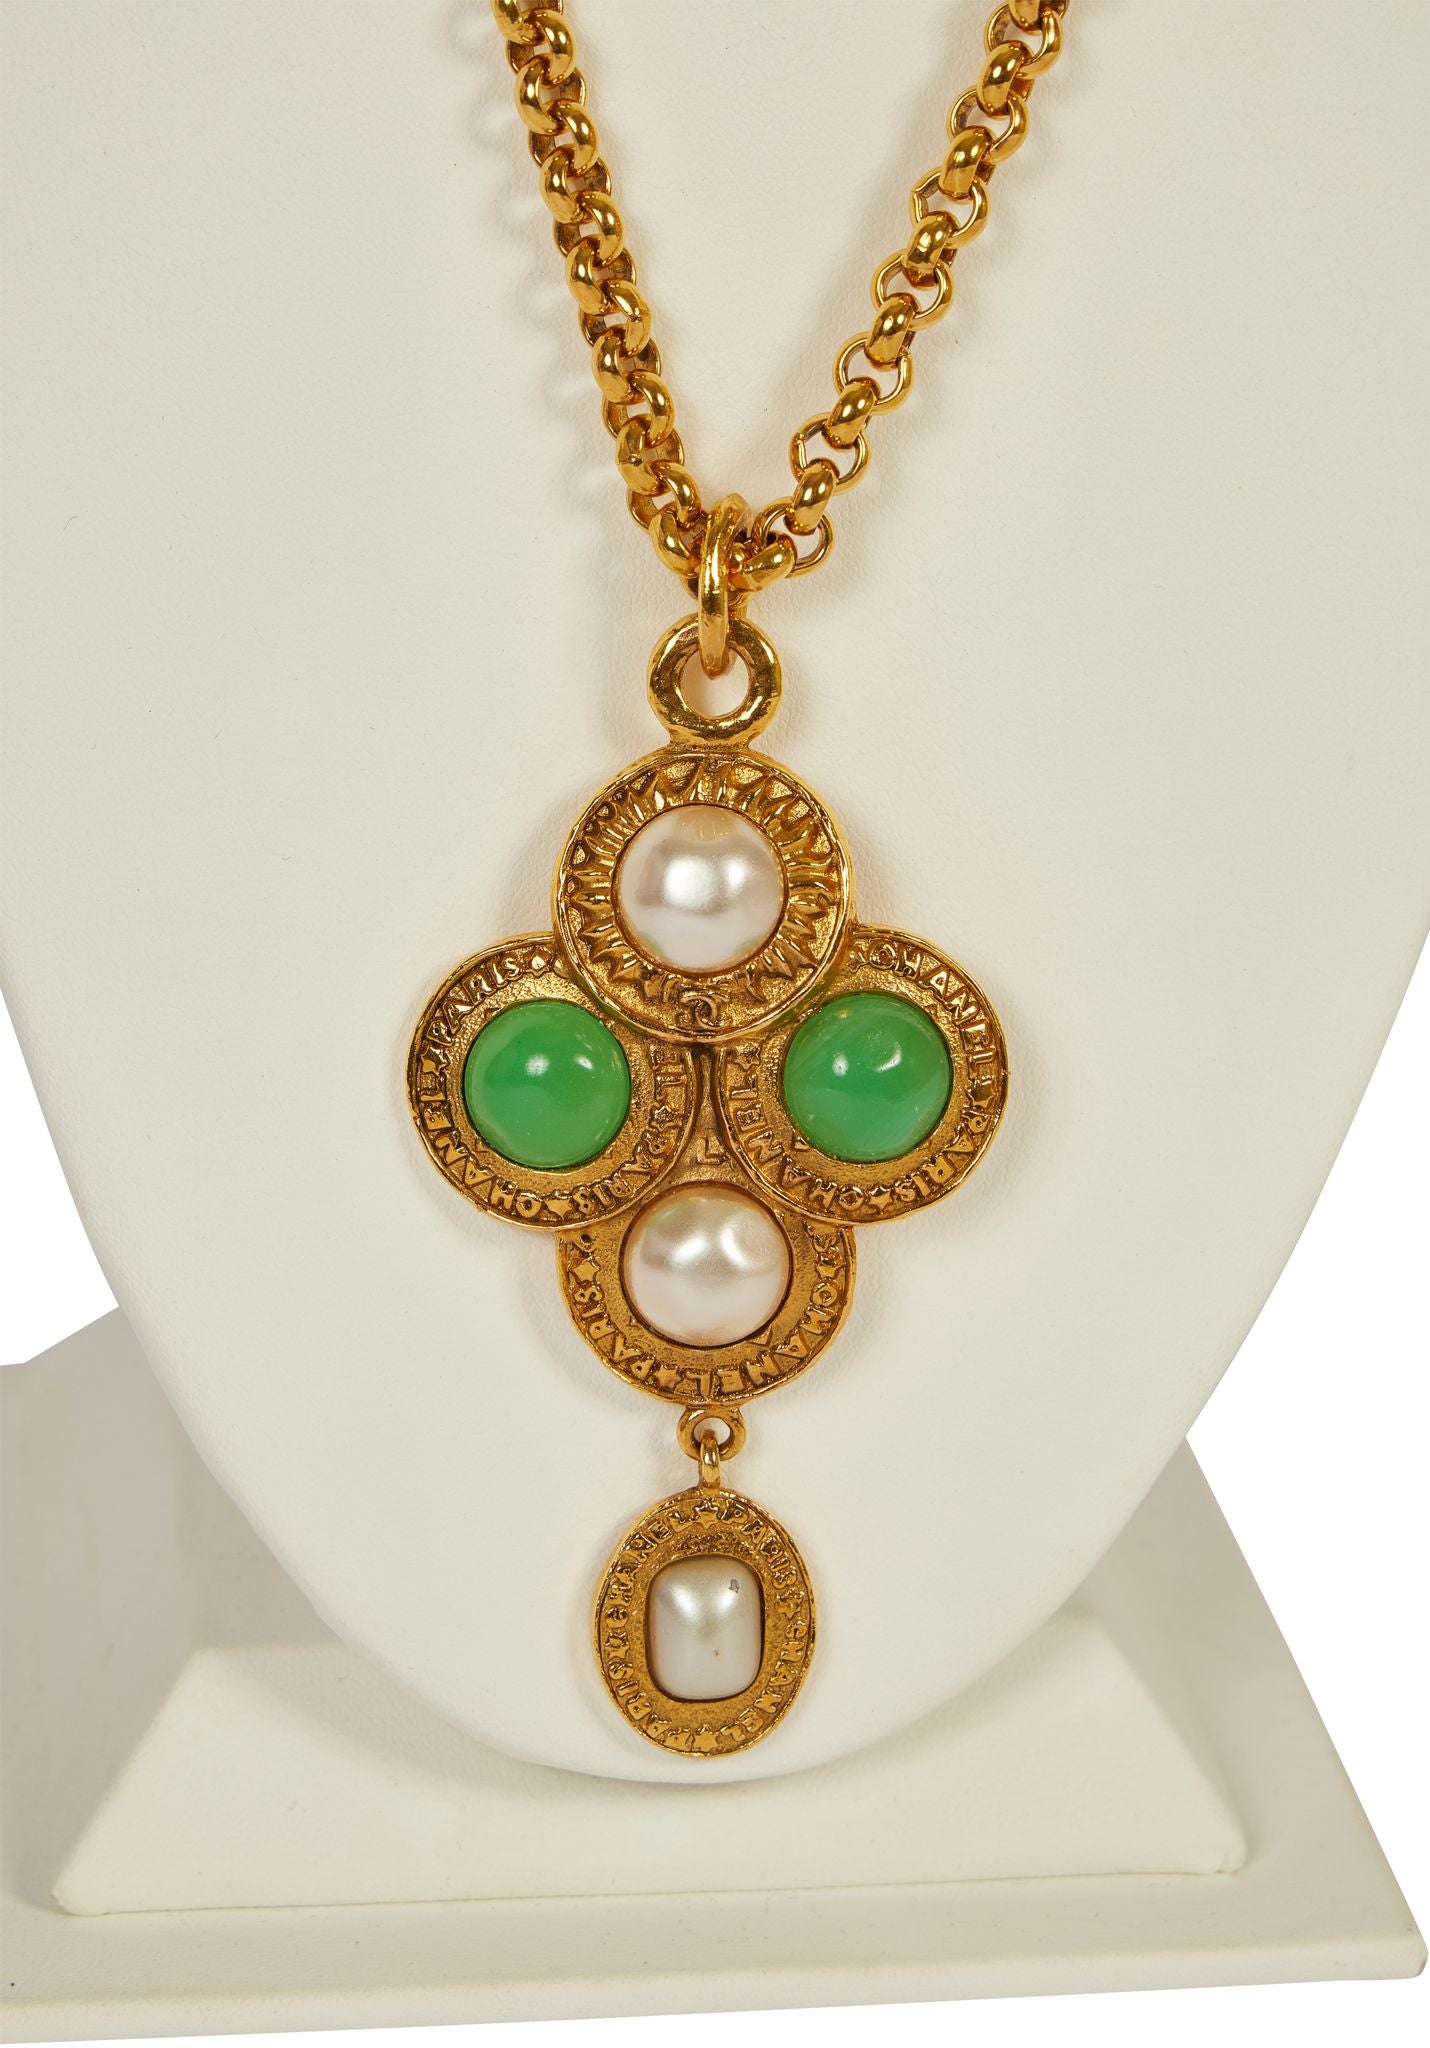 CHANEL VERY VINTAGE 1970'S EMERALD GREEN GRIPOIX NECKLACE